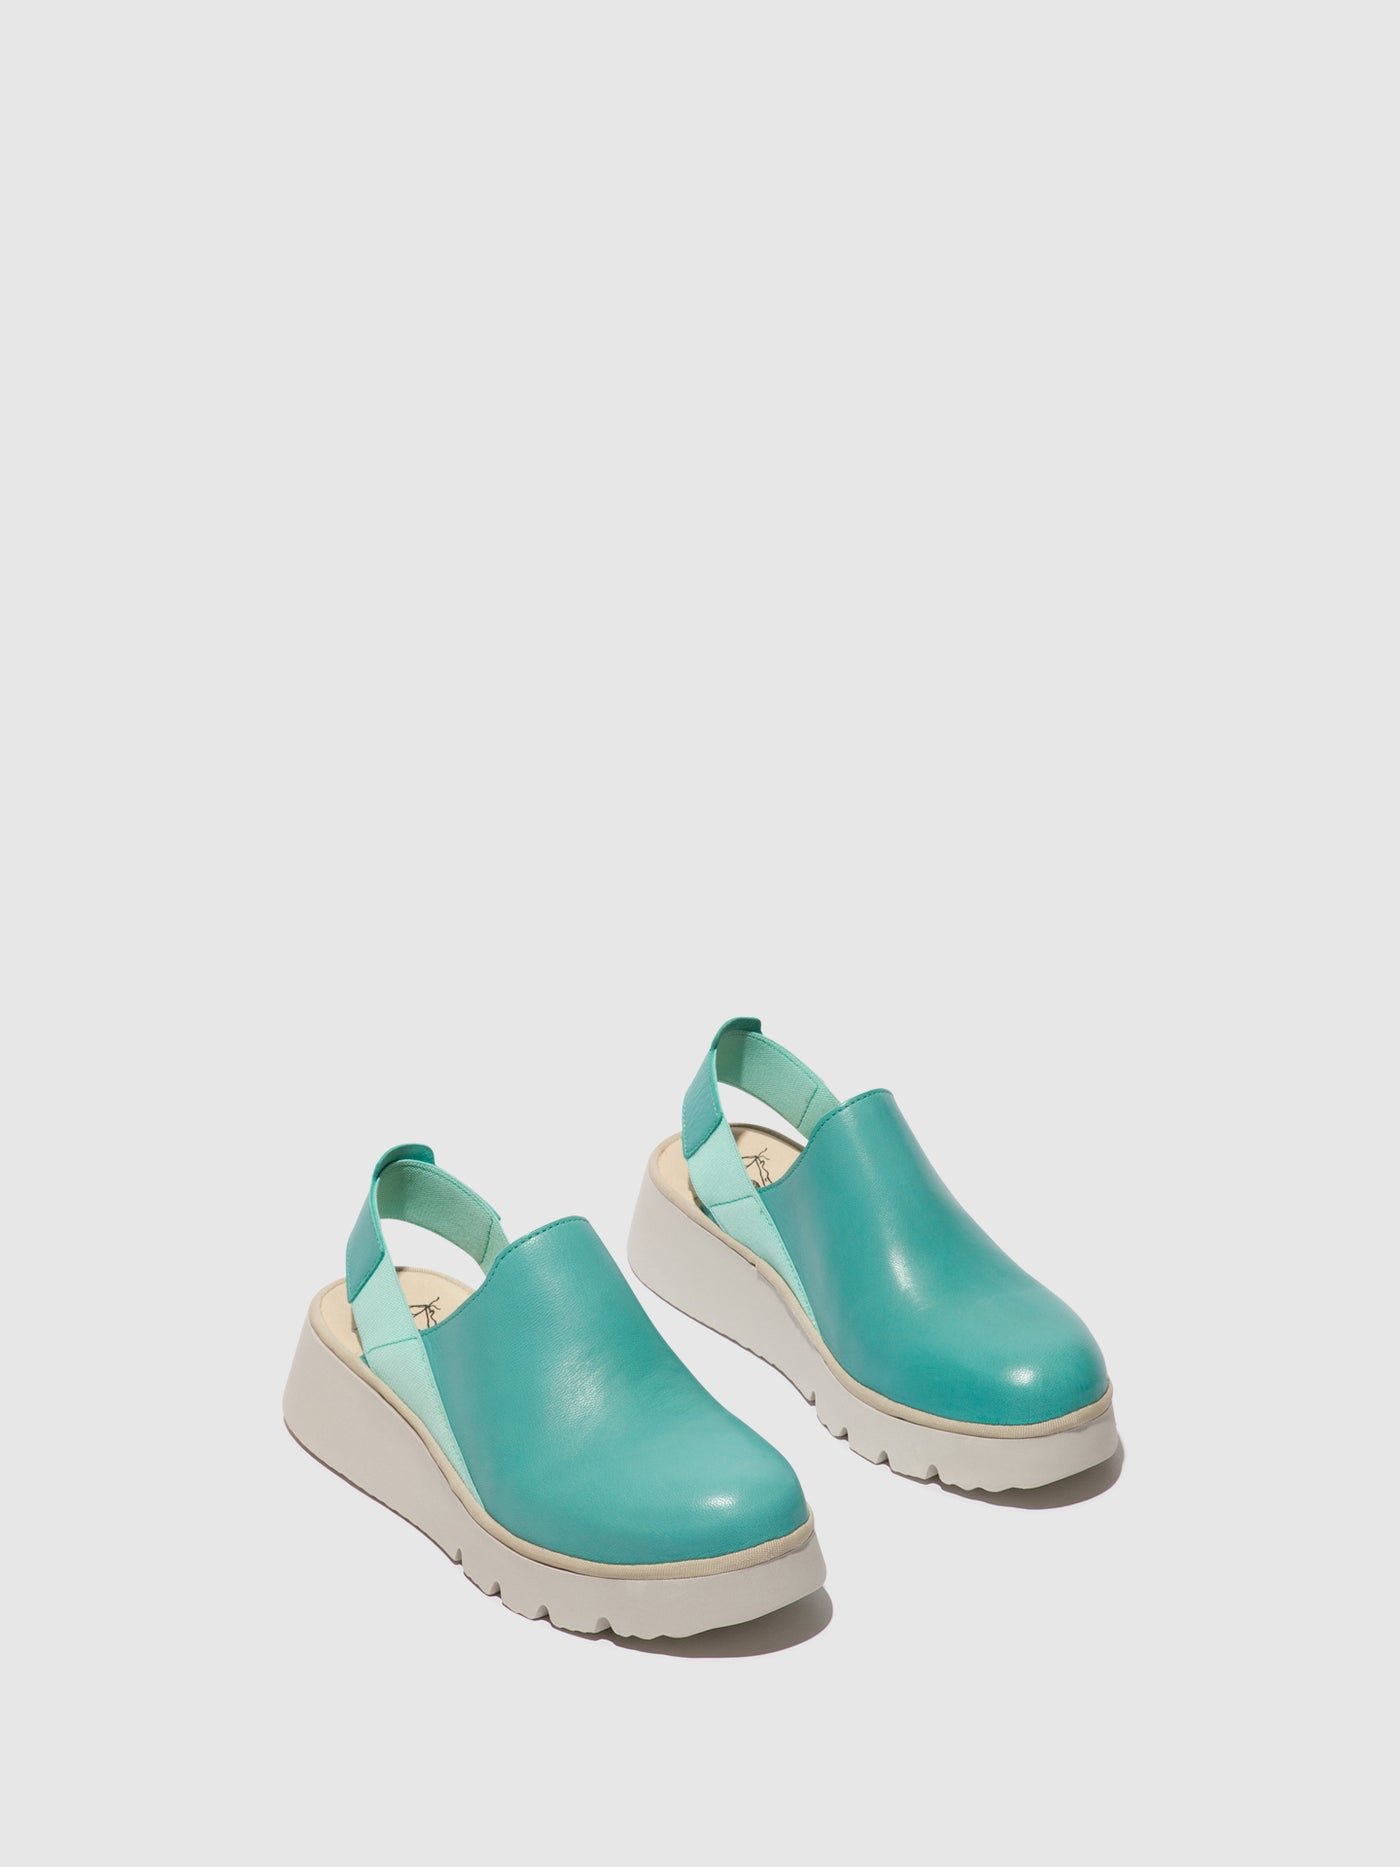 Sling-Back Shoes PLOG430FLY TURQUOISE